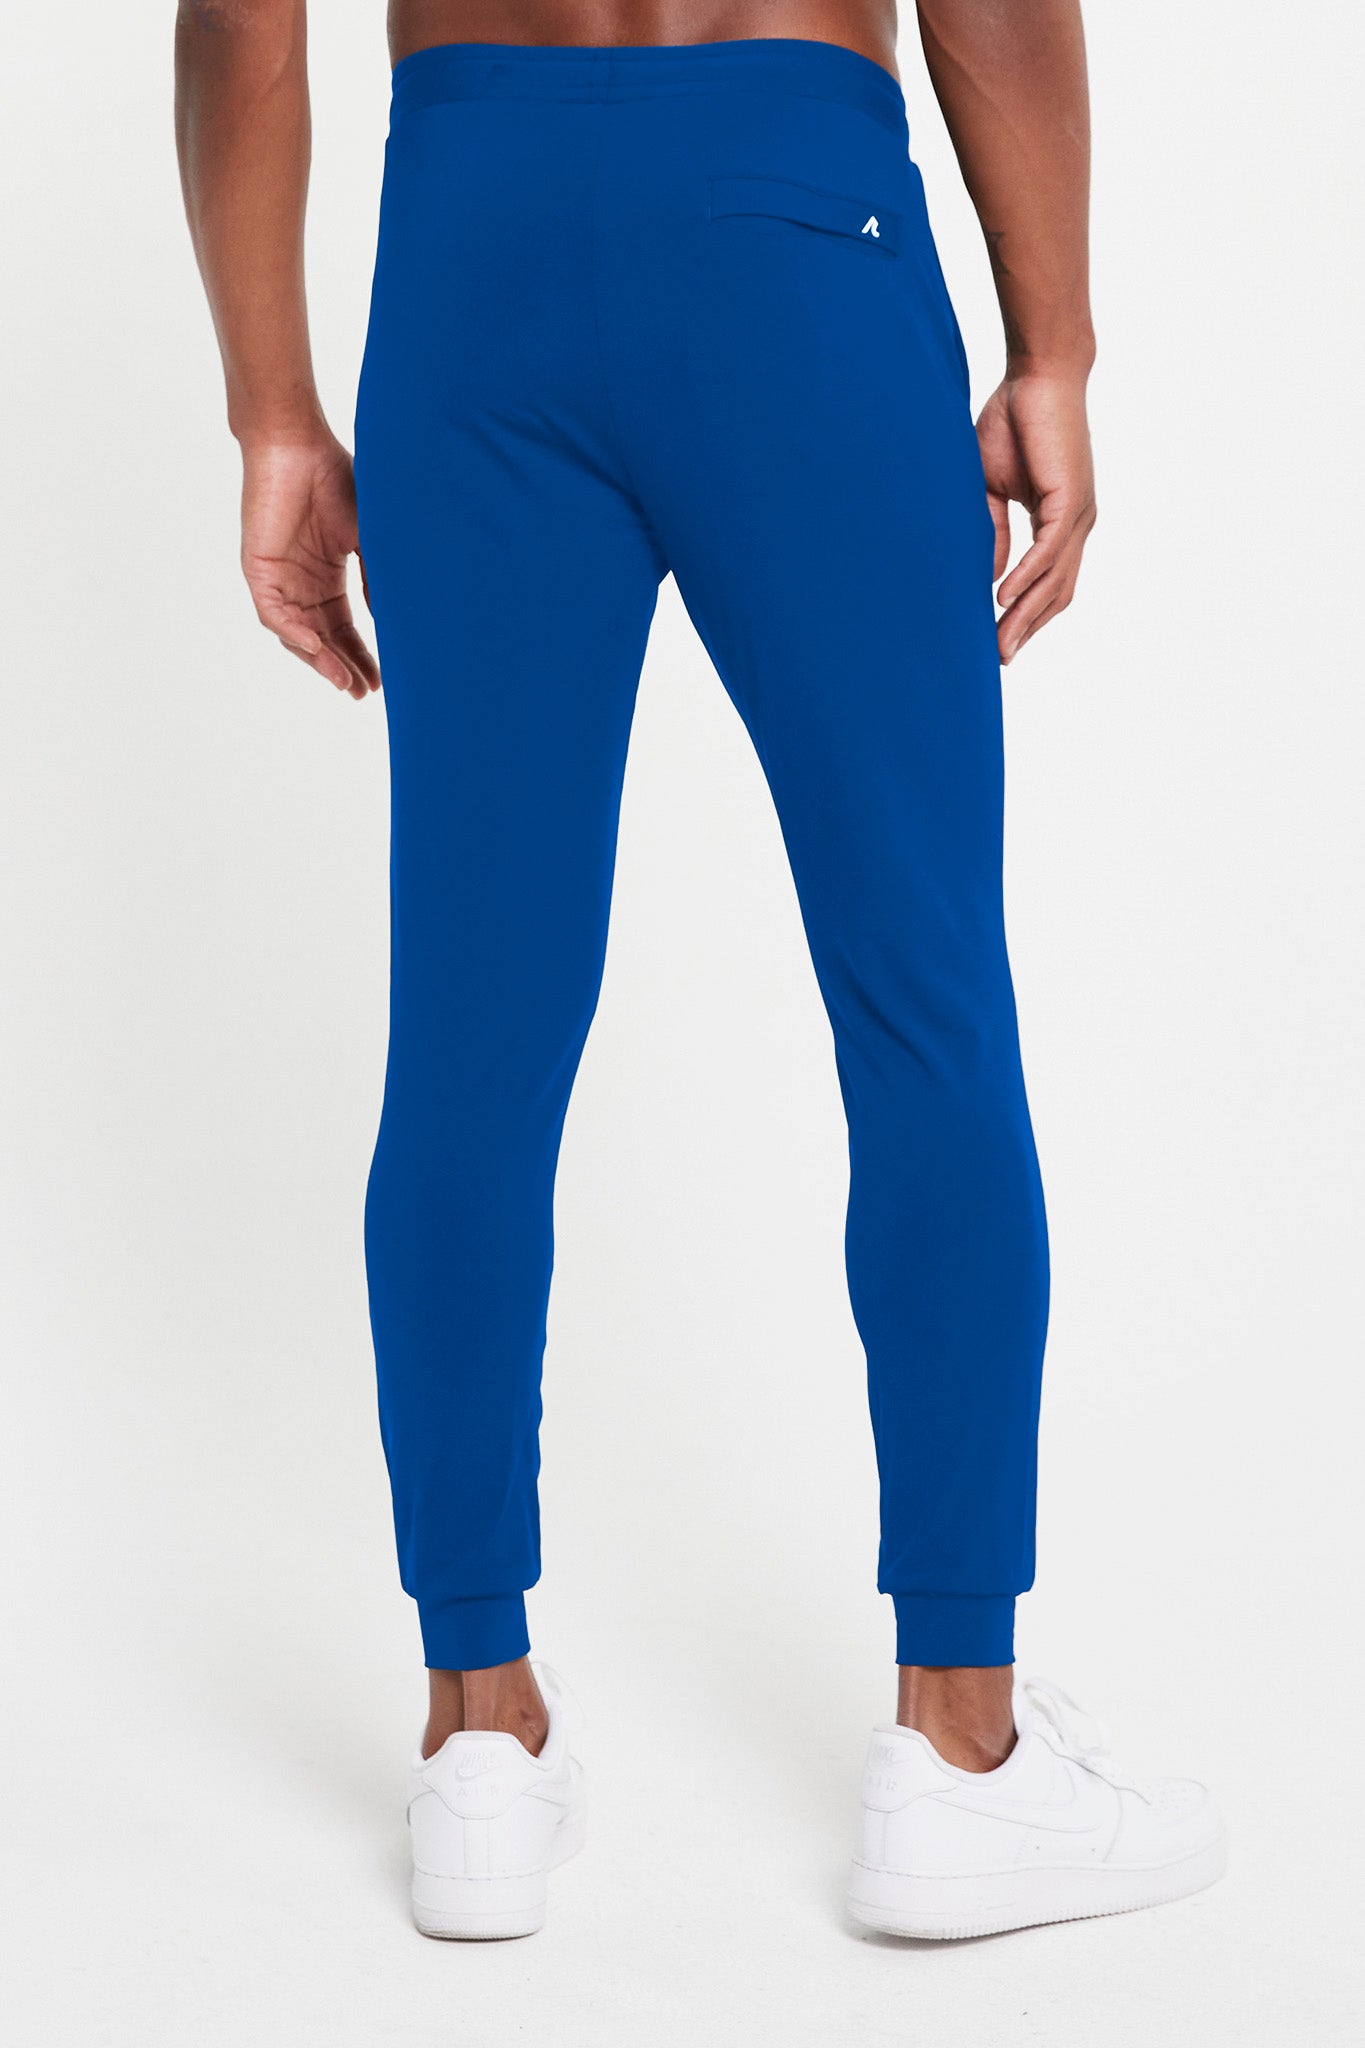 Image of the donahue jogger in classic blue